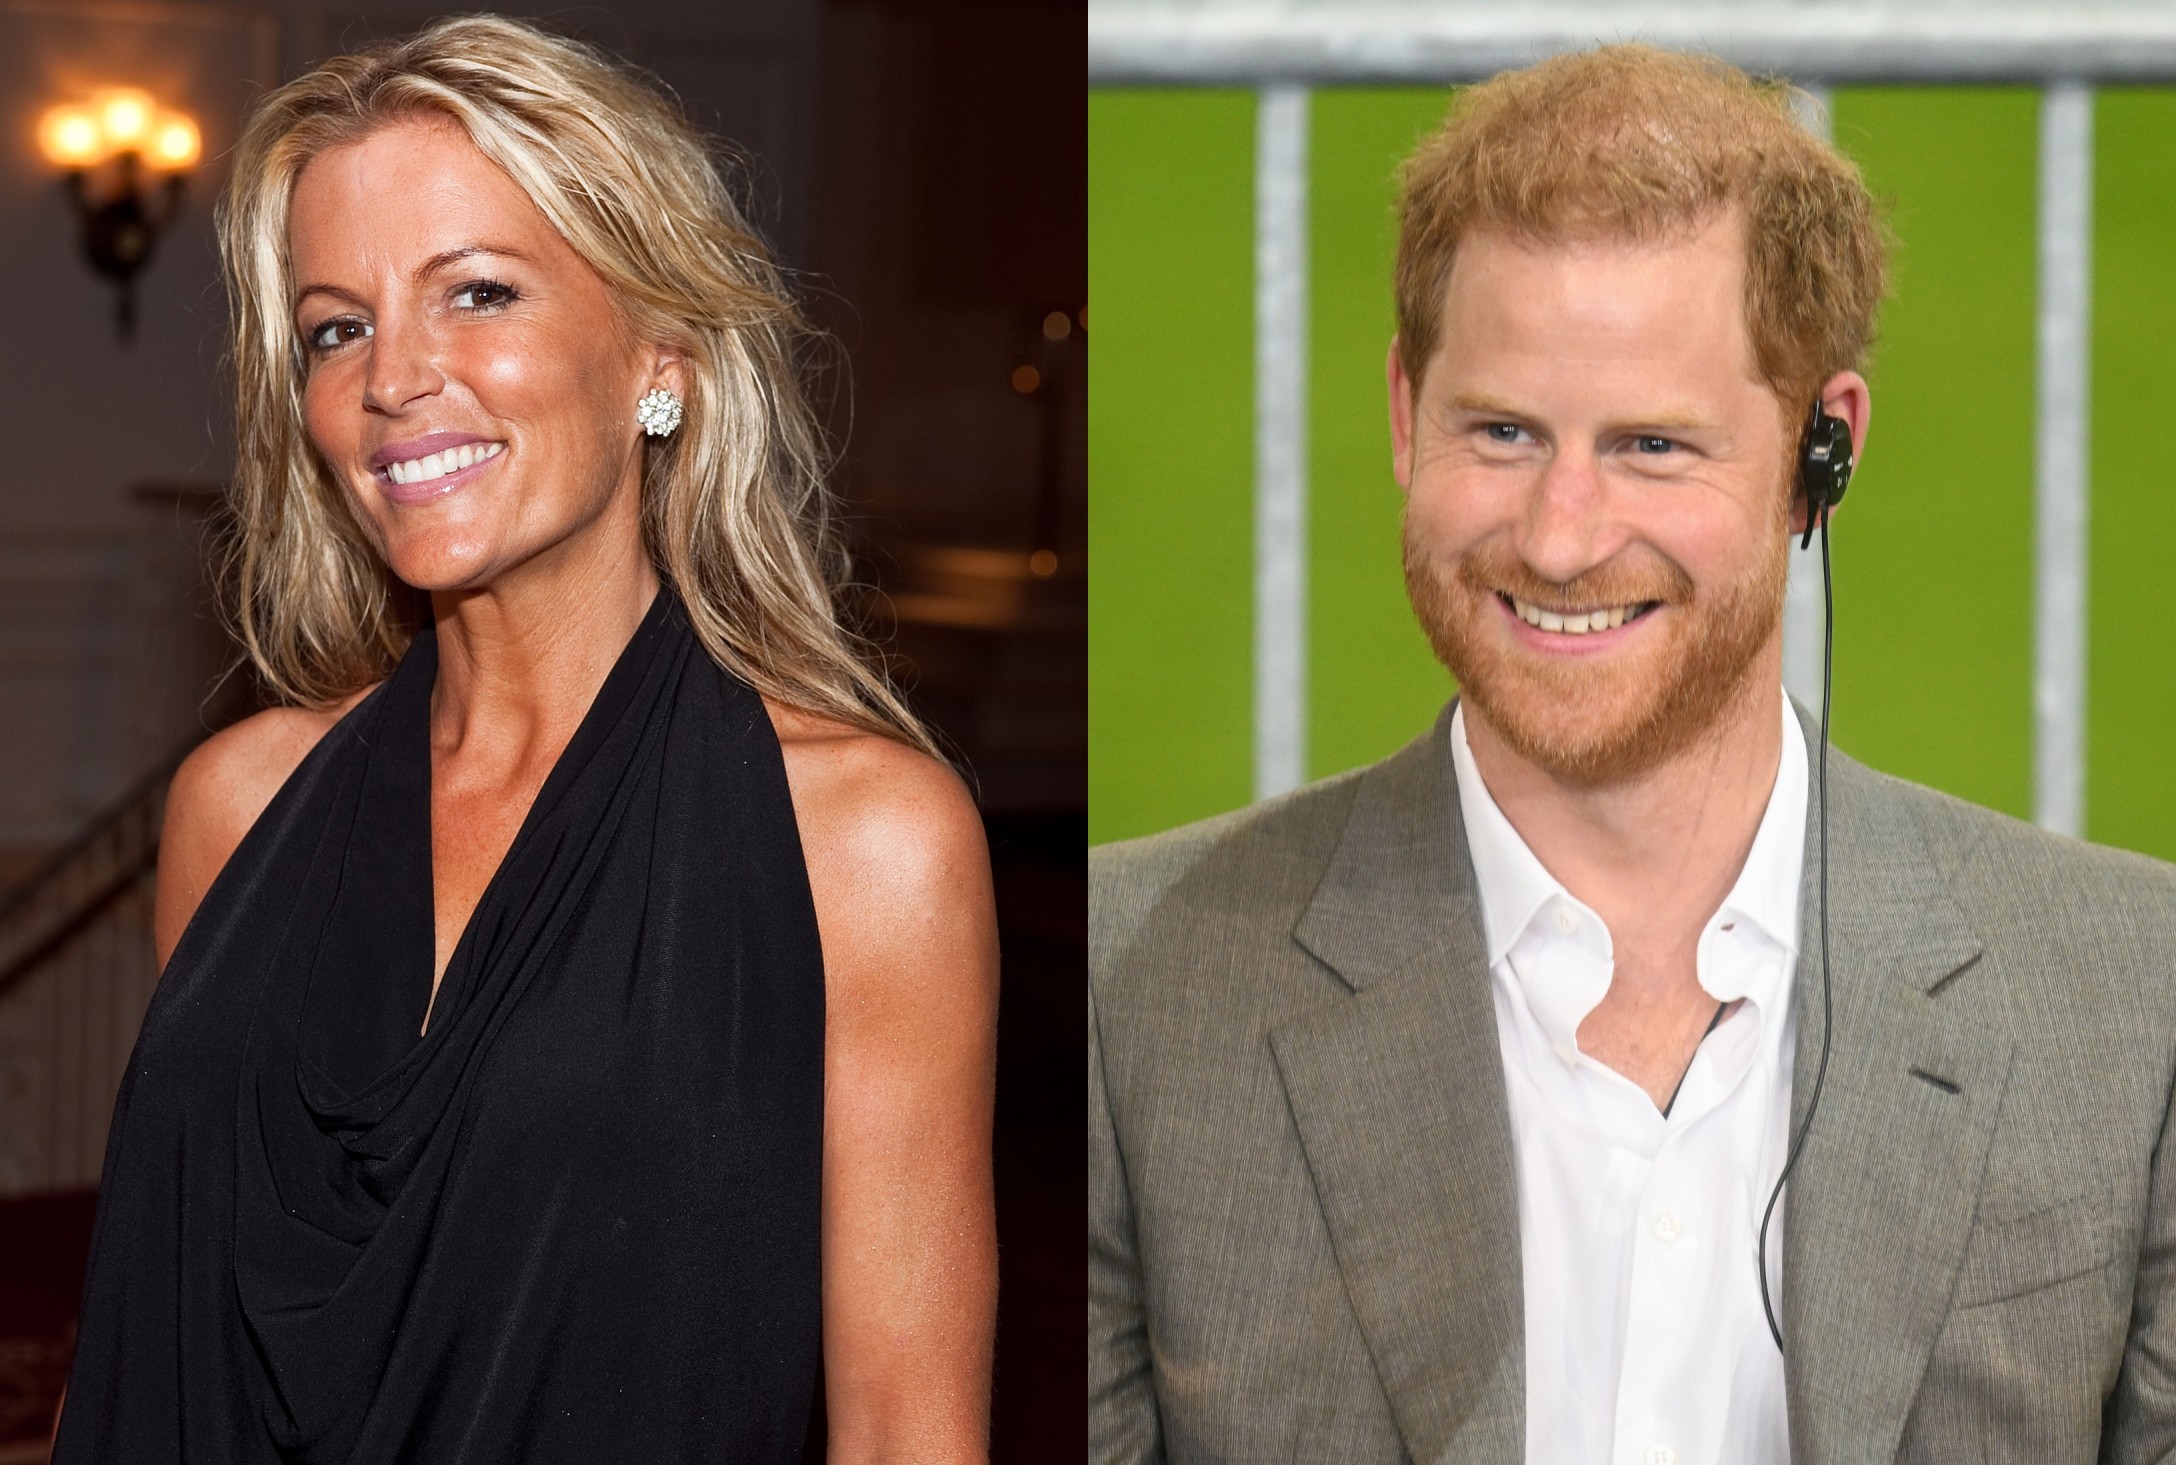 Real Housewives Star Claims She Had Passionate Affair With Prince Harry When He Was 21 CafeMom image photo